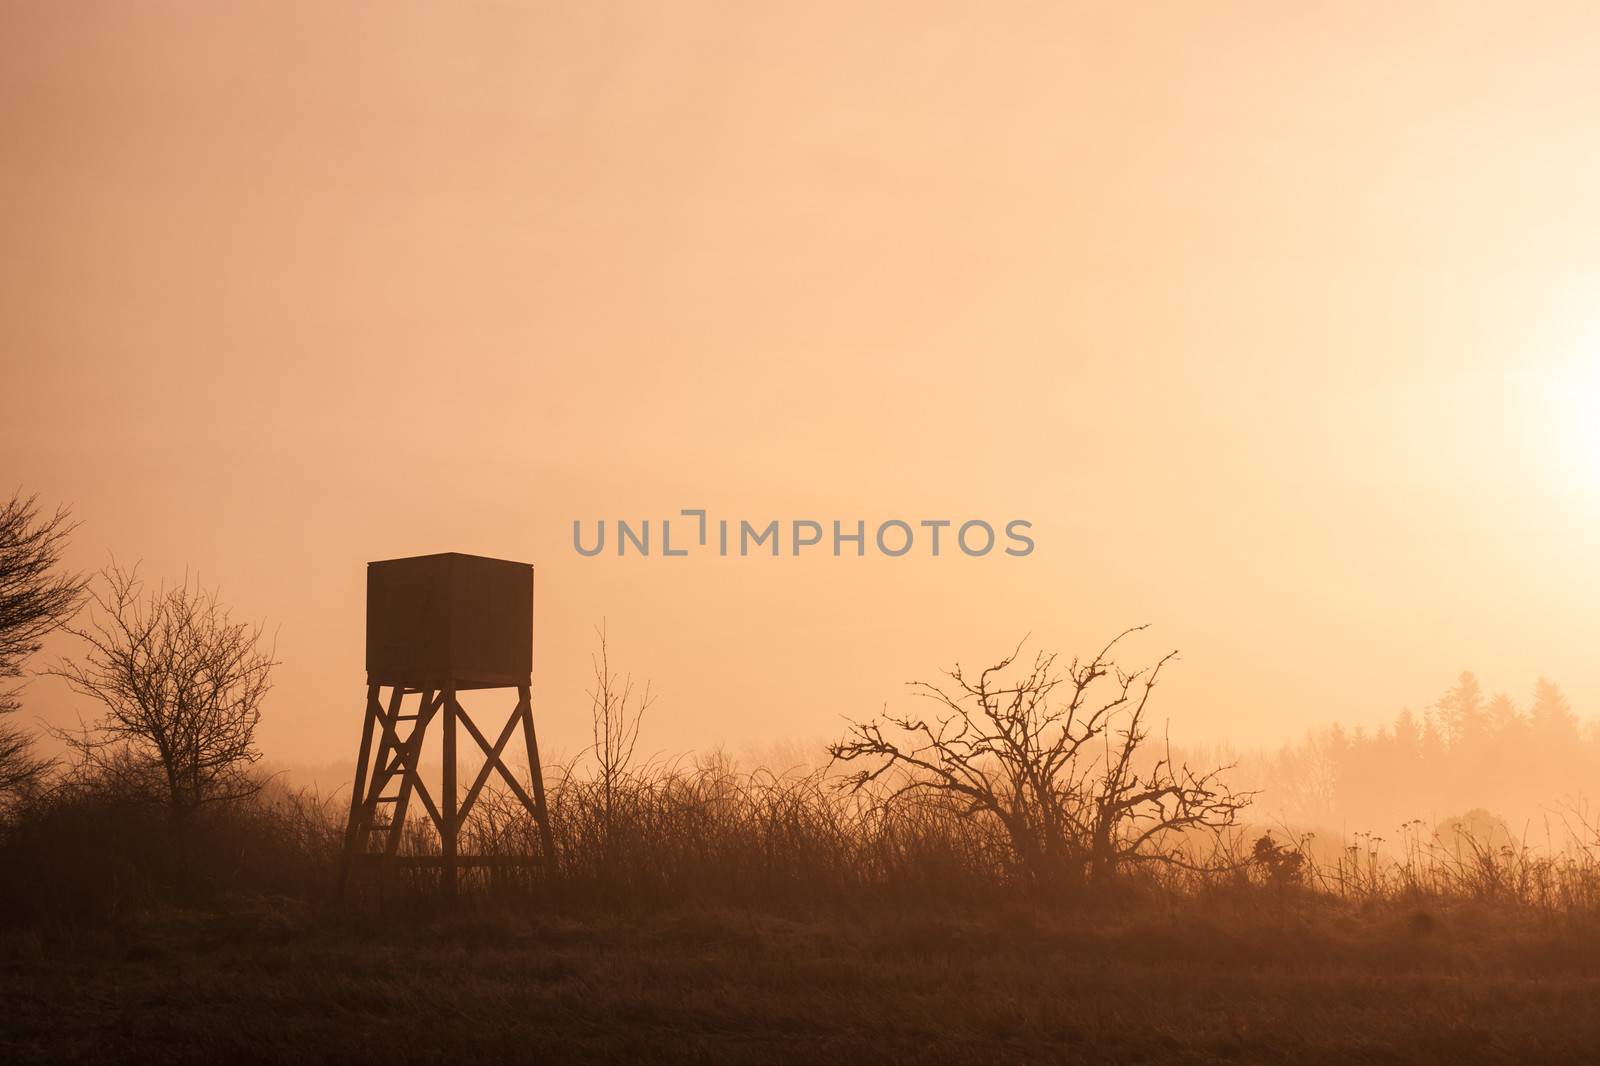 Hunters lookout tower in beautiful morning mist scenery